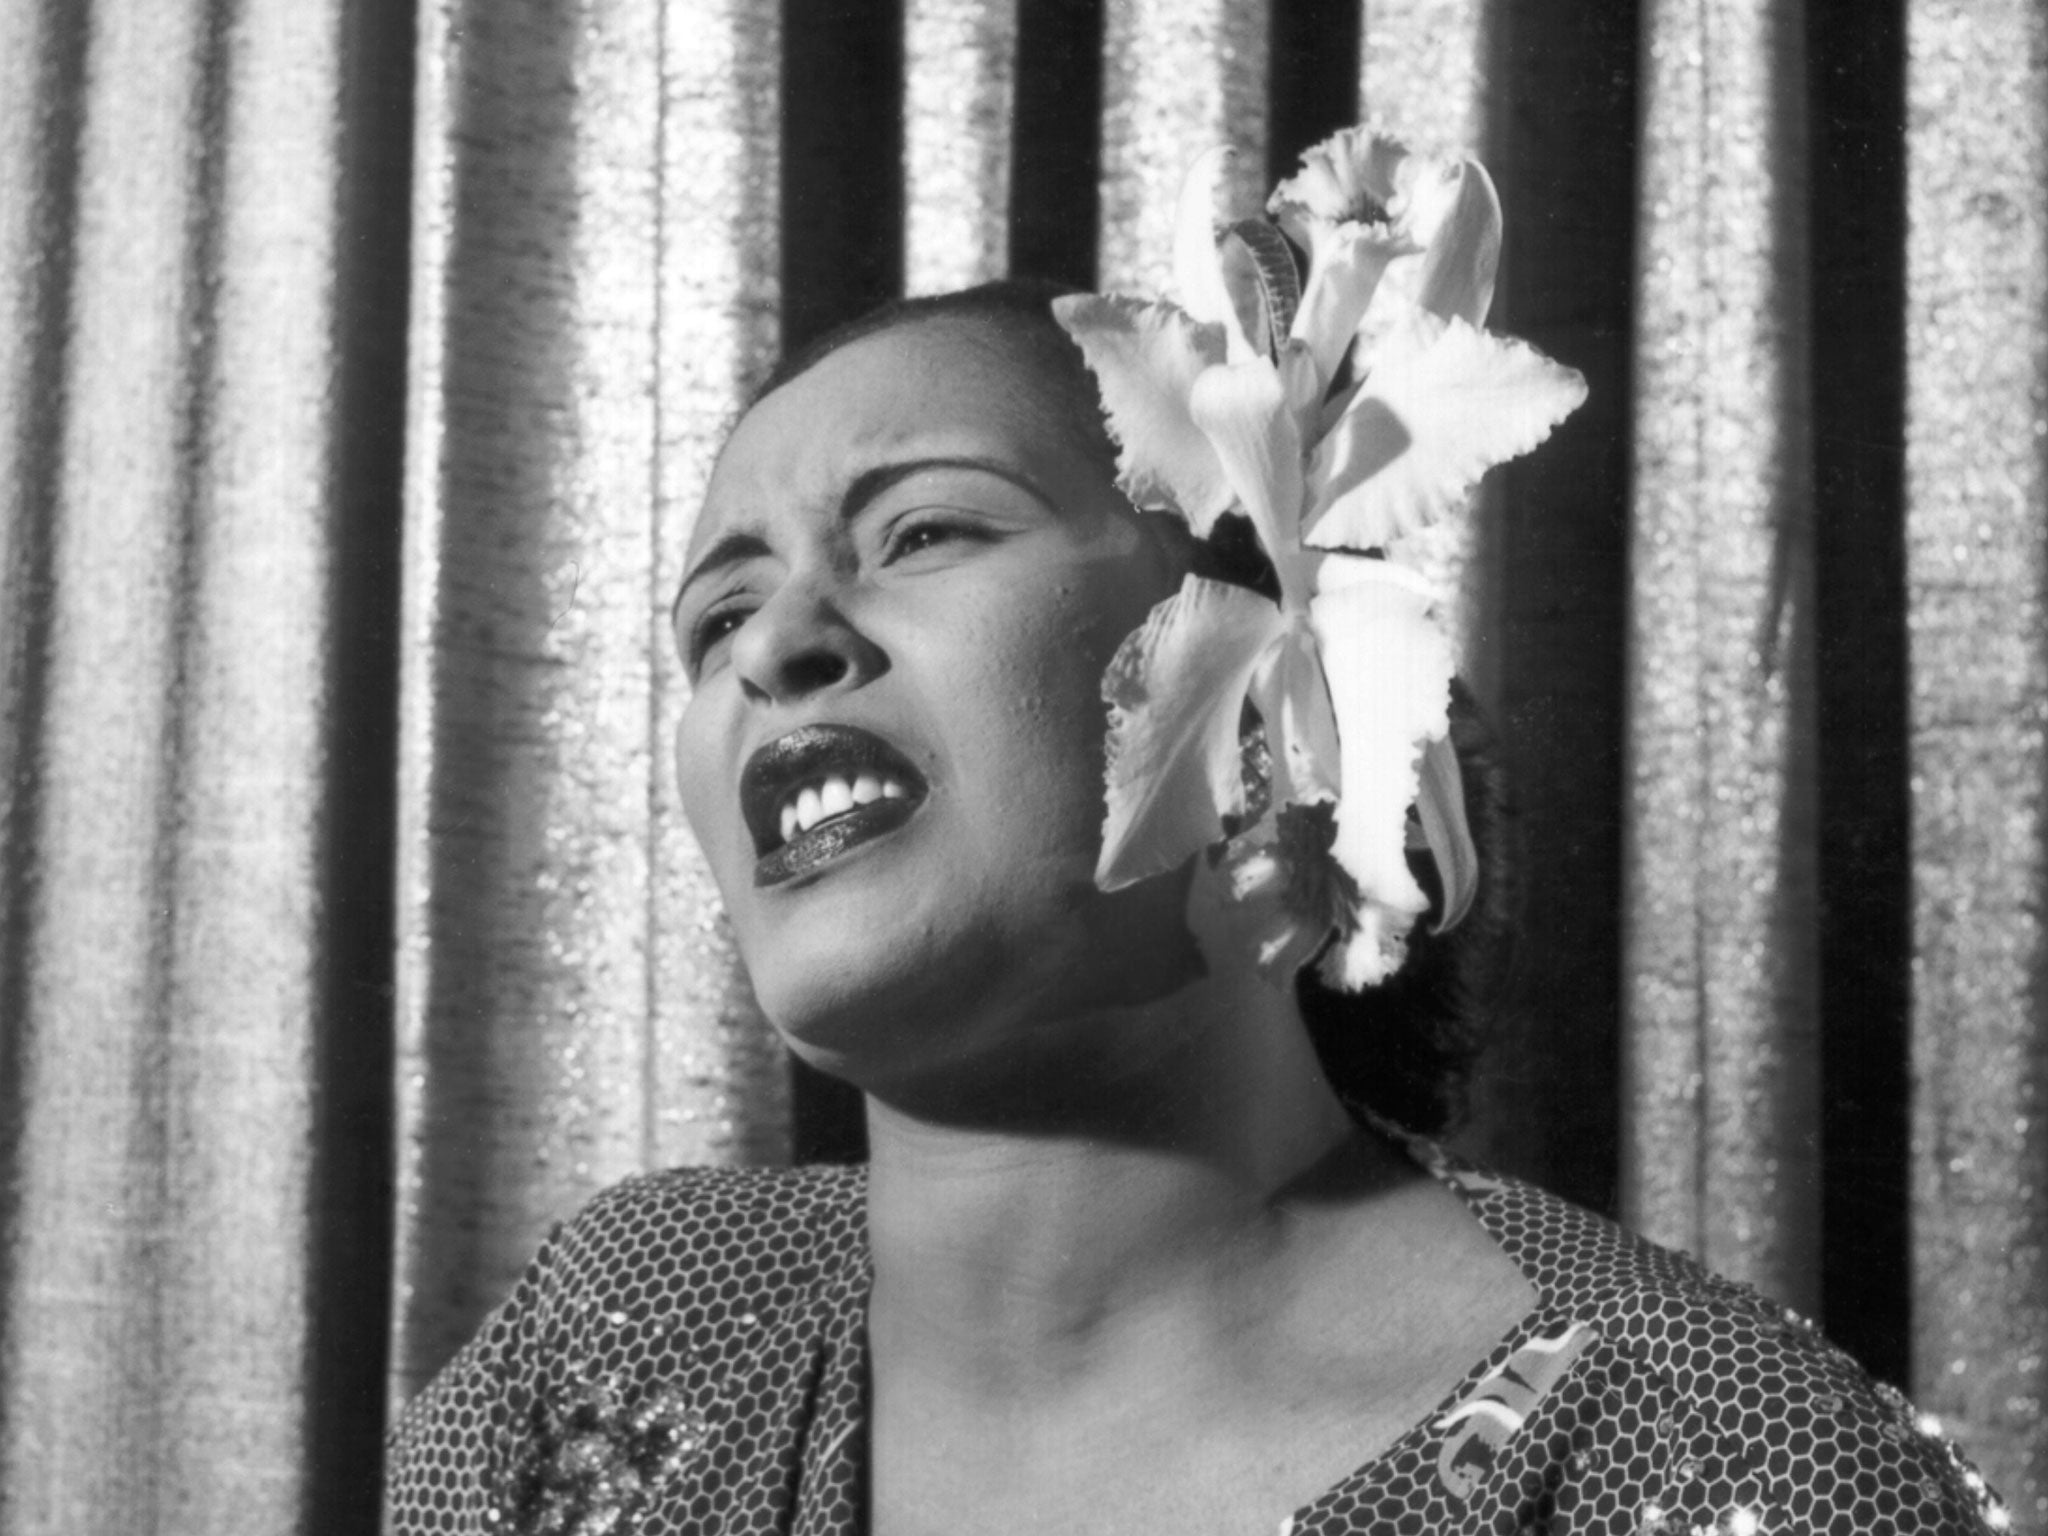 James Erskine’s ‘Billie’ told Billie Holiday’s story in a compellingly original way, with zero filter